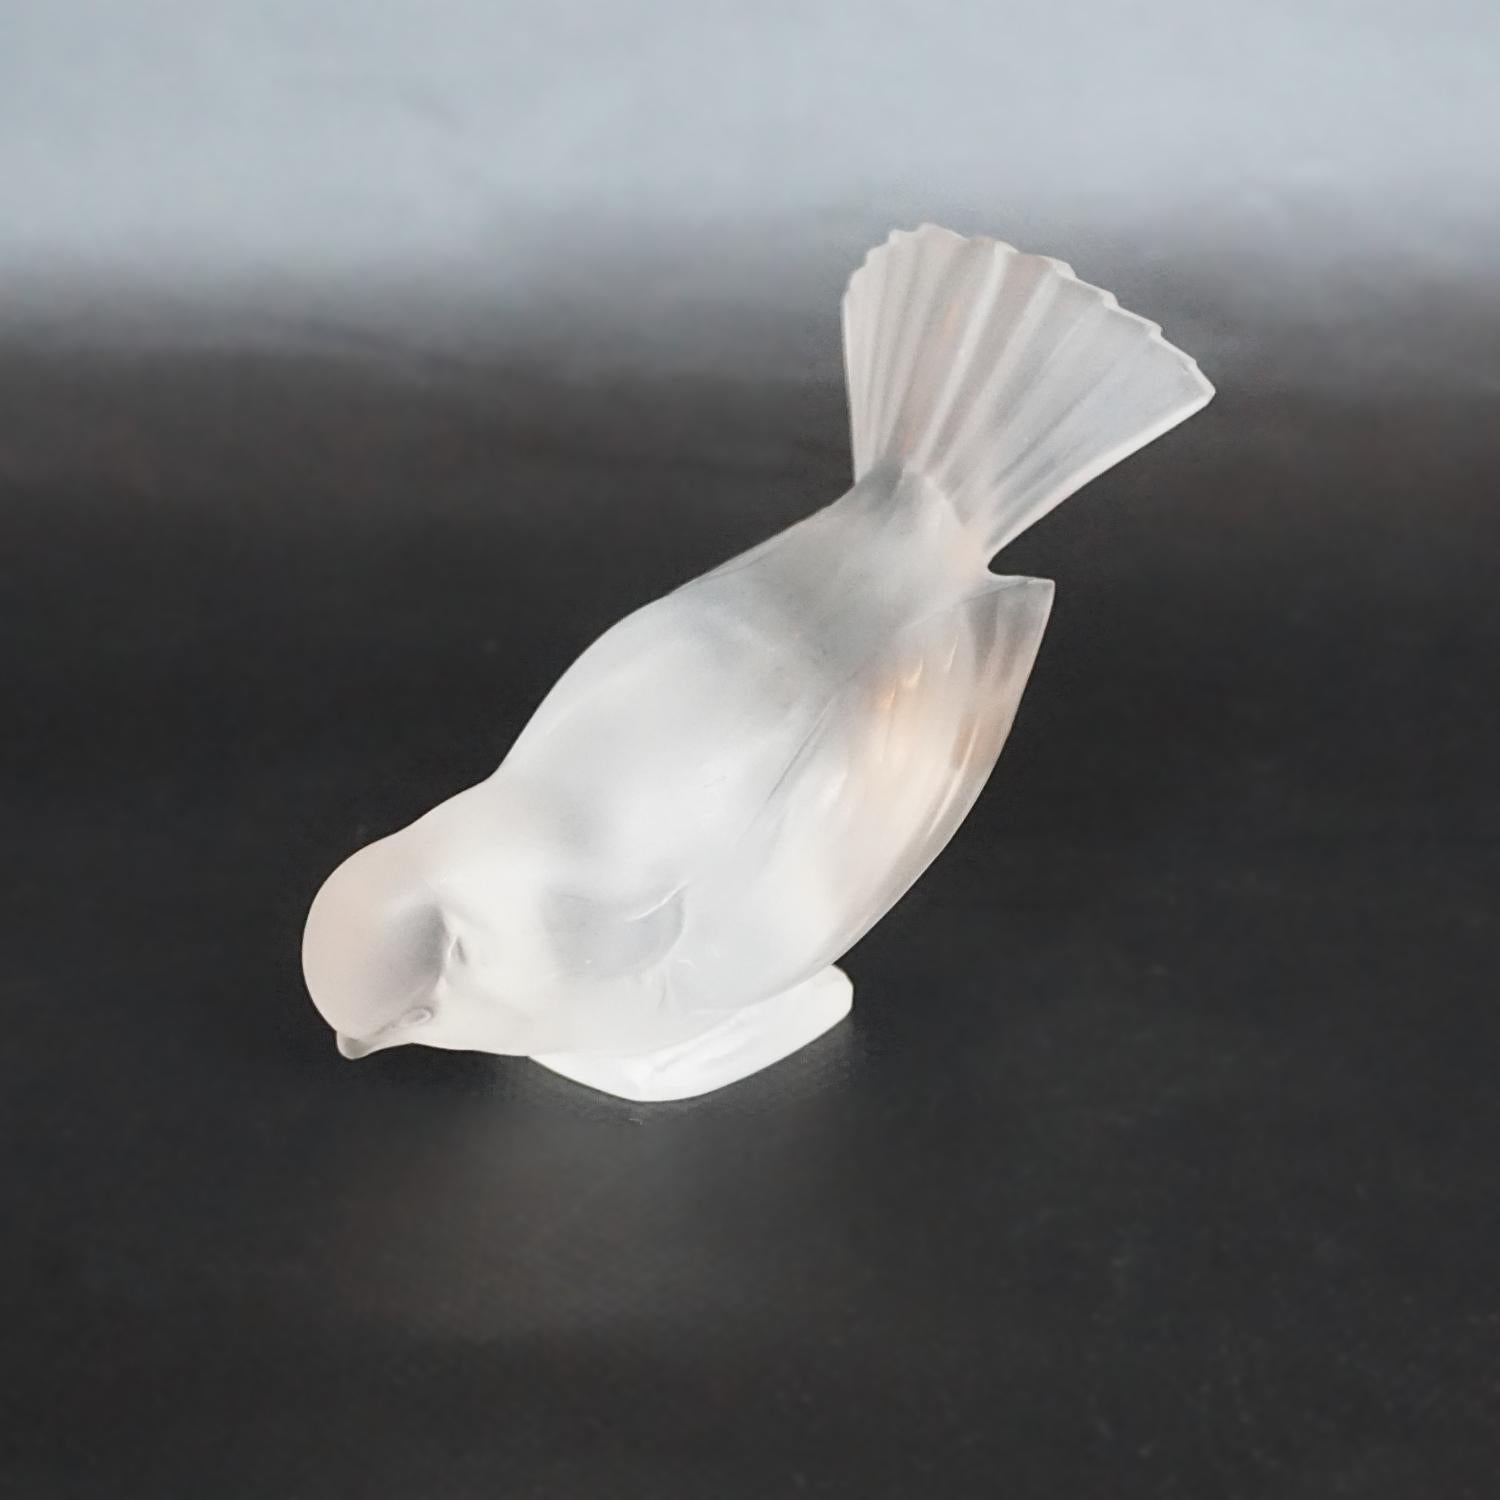 Moineau Hardi, an Art Deco glass bird paperweight by René Lalique (1860-1945). A frosted glass figure of a sparrow pecking for food. Model number 1150. Stencil etched R Lalique France to underside. (Etching very faint and not visible with